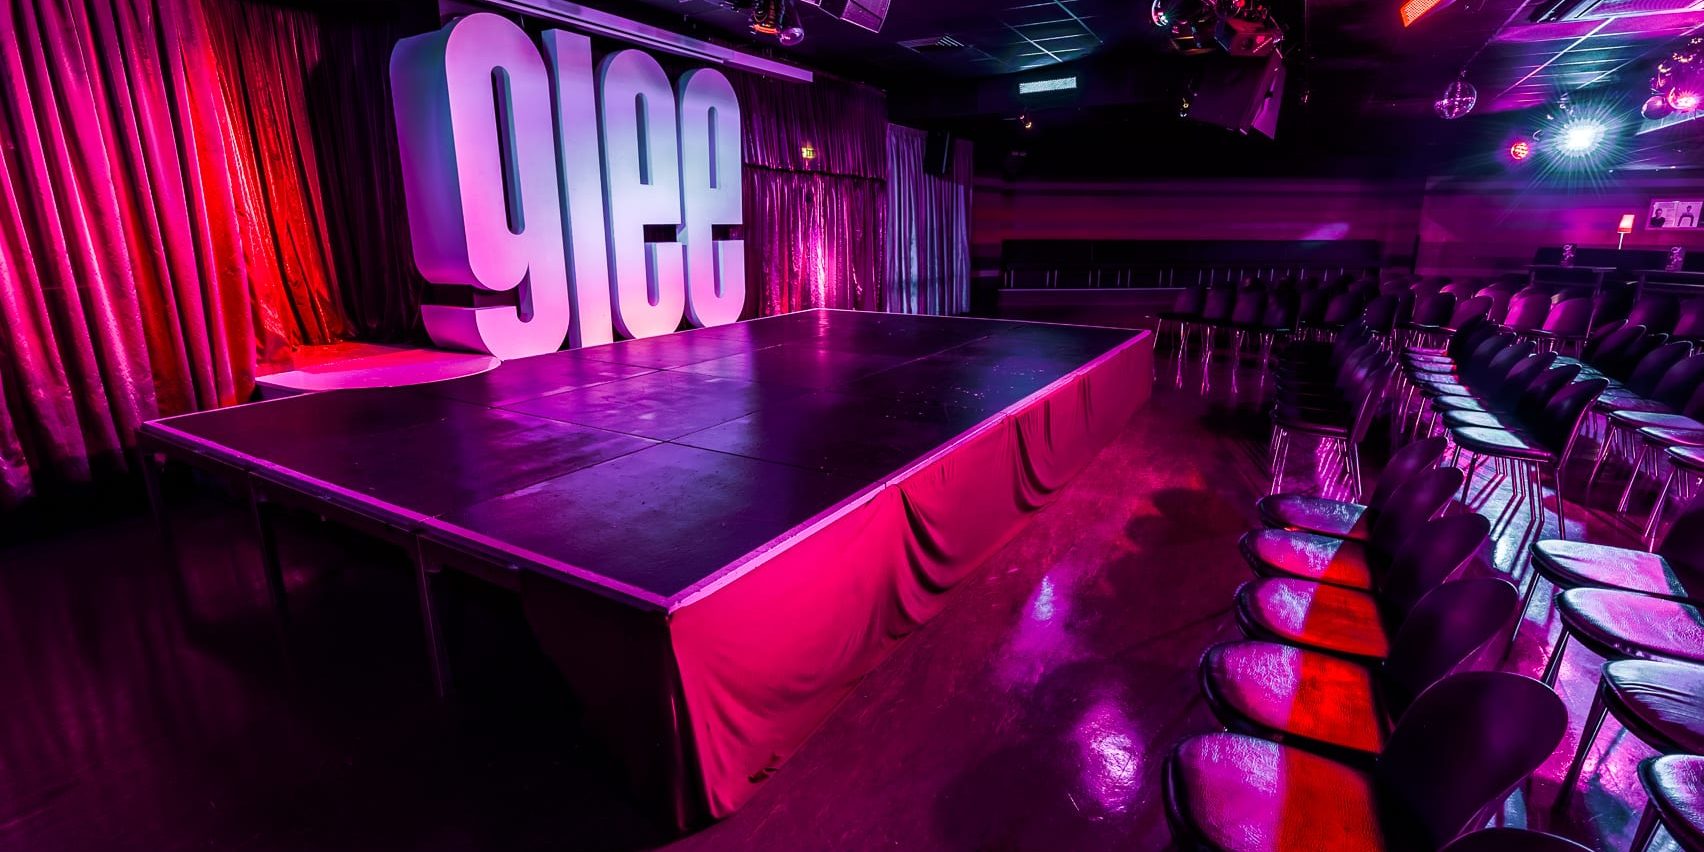 Birmingham - What's On at The Glee Club - Comedy, Music, Events